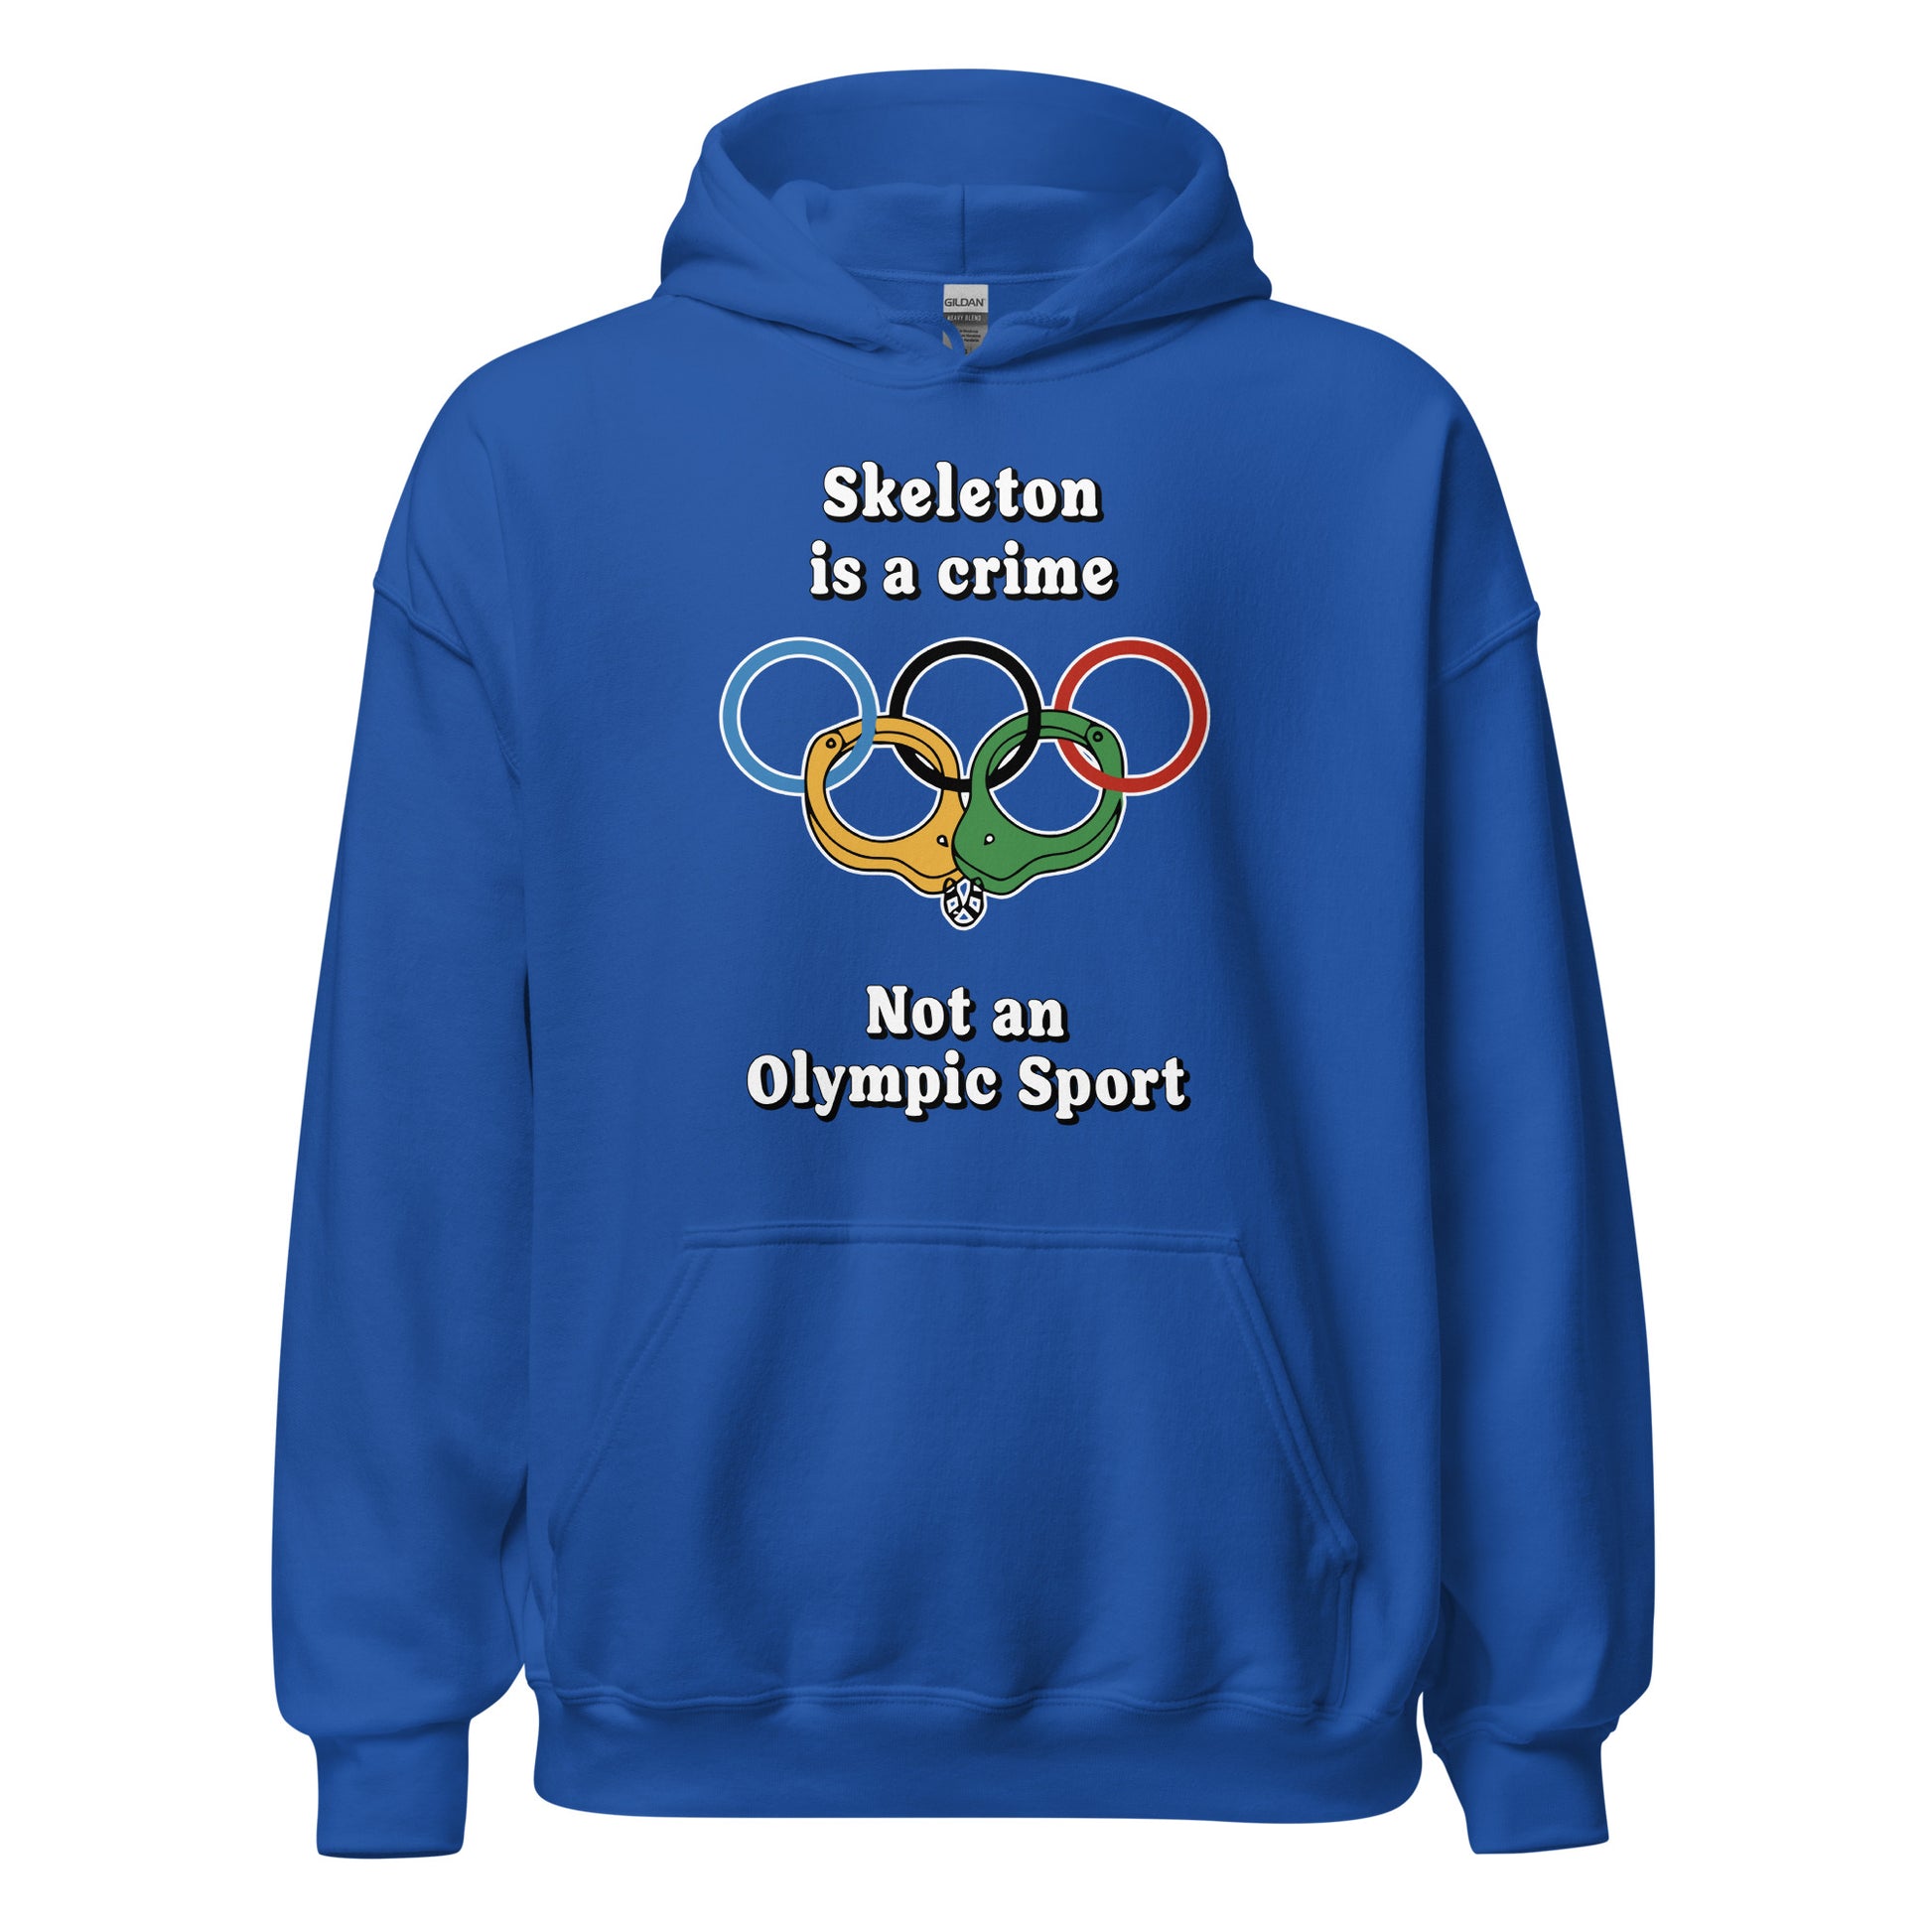 Skeleton is a crime not an olympic sport design printed on a hoodie by Whistler Shirts